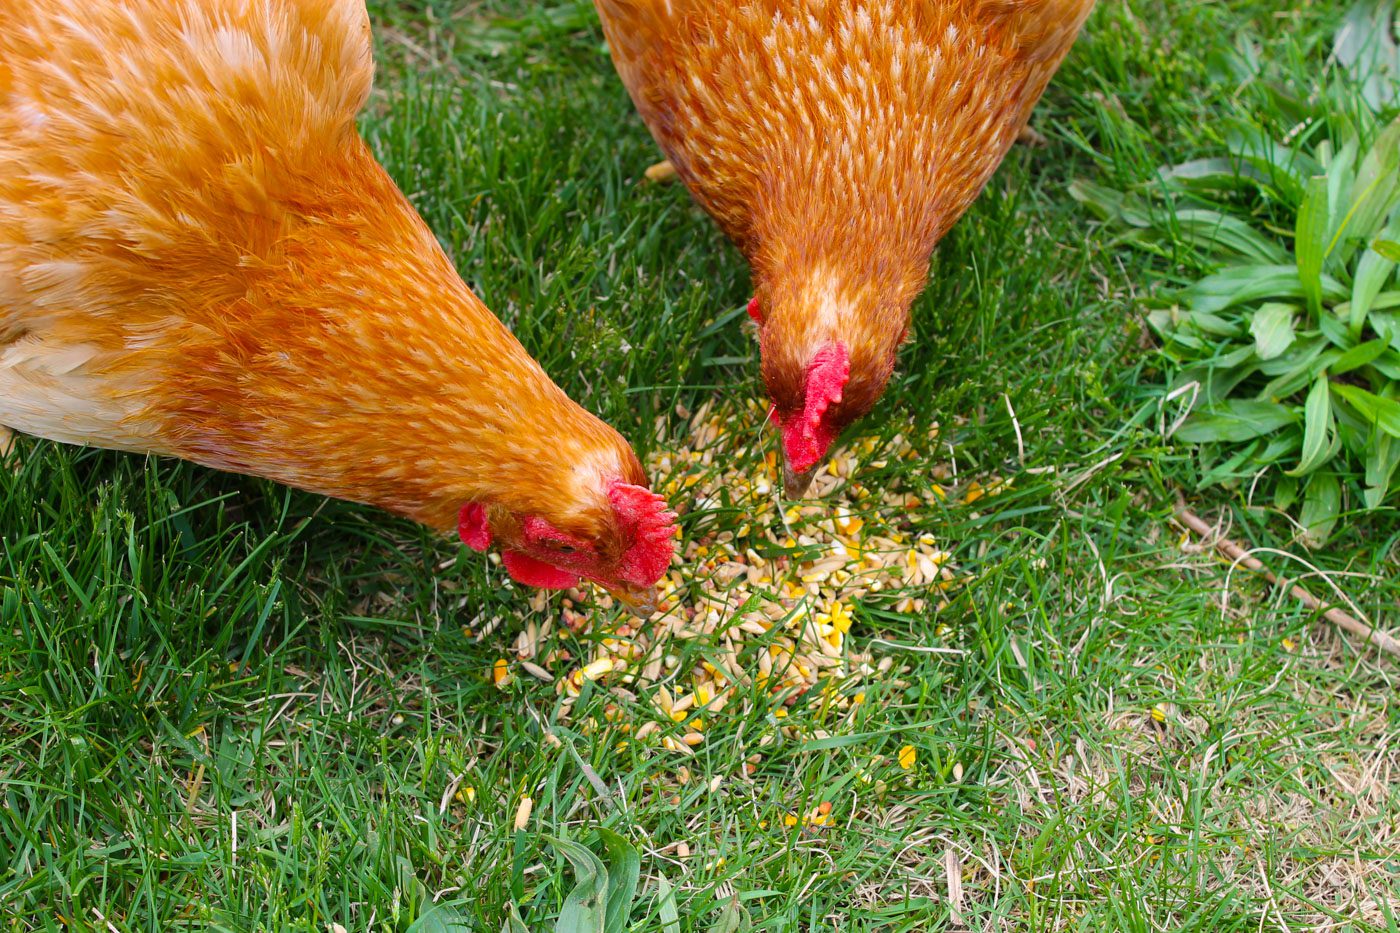 two hens pecking at some chicken feed in the grass